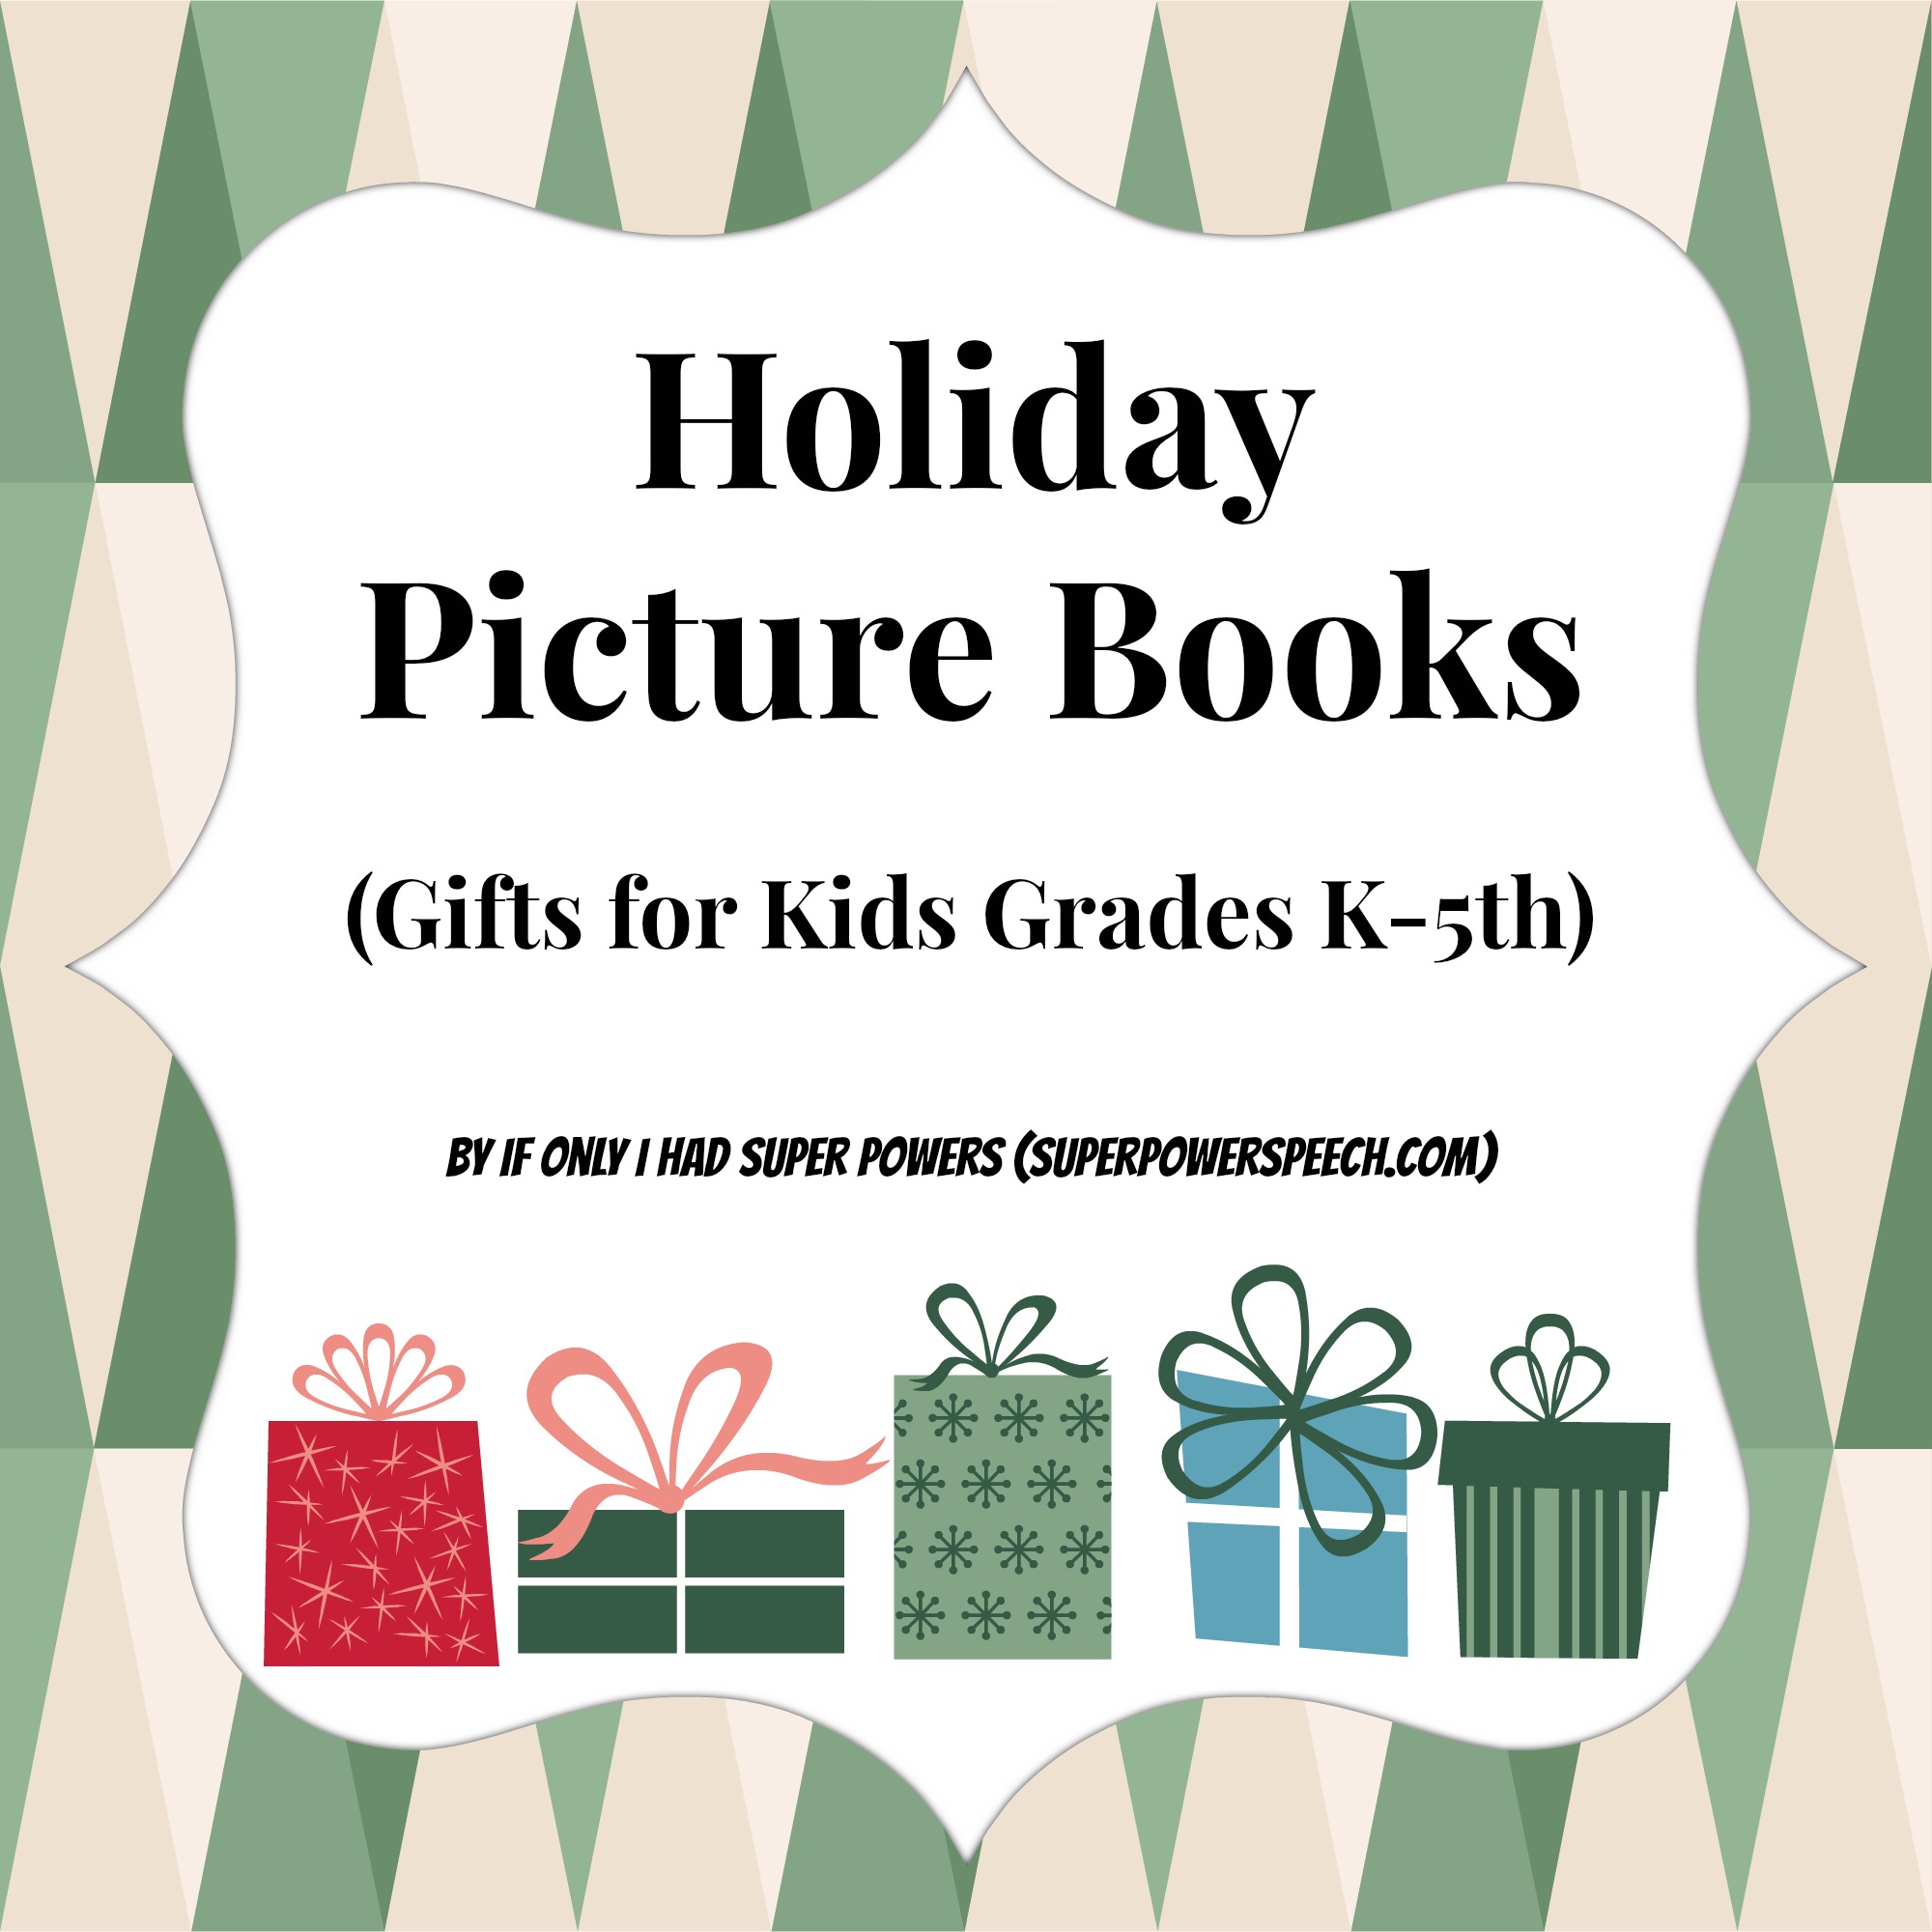 Picture books–the perfect gift for the elementary school child!